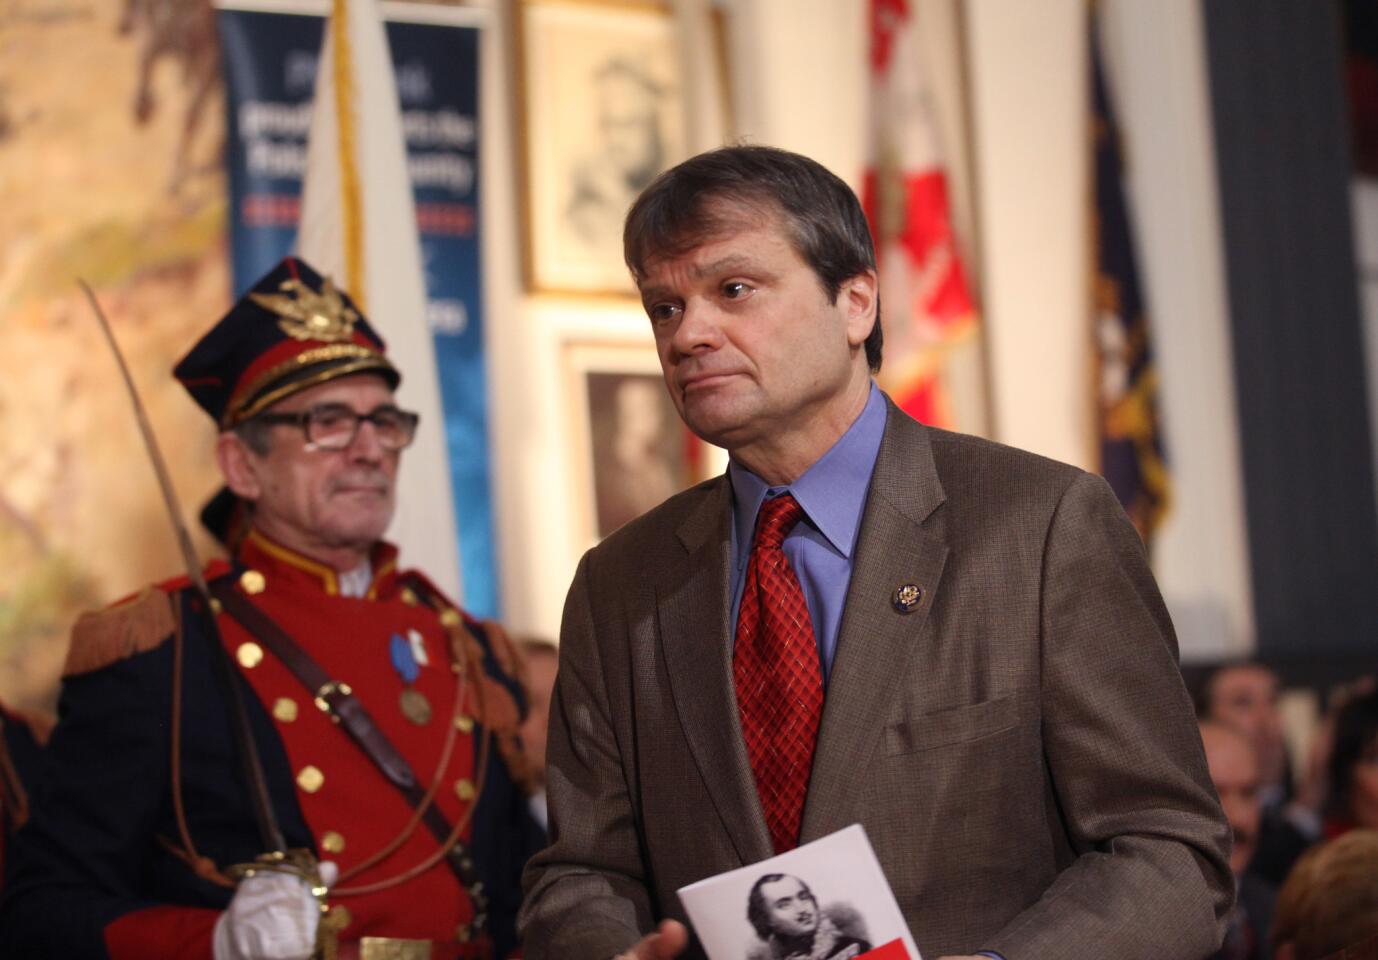 Congressman Mike Quigley, D-5th, has sold his six-bedroom house in Lakeview for $1.26 million as part of a decision to downsize.